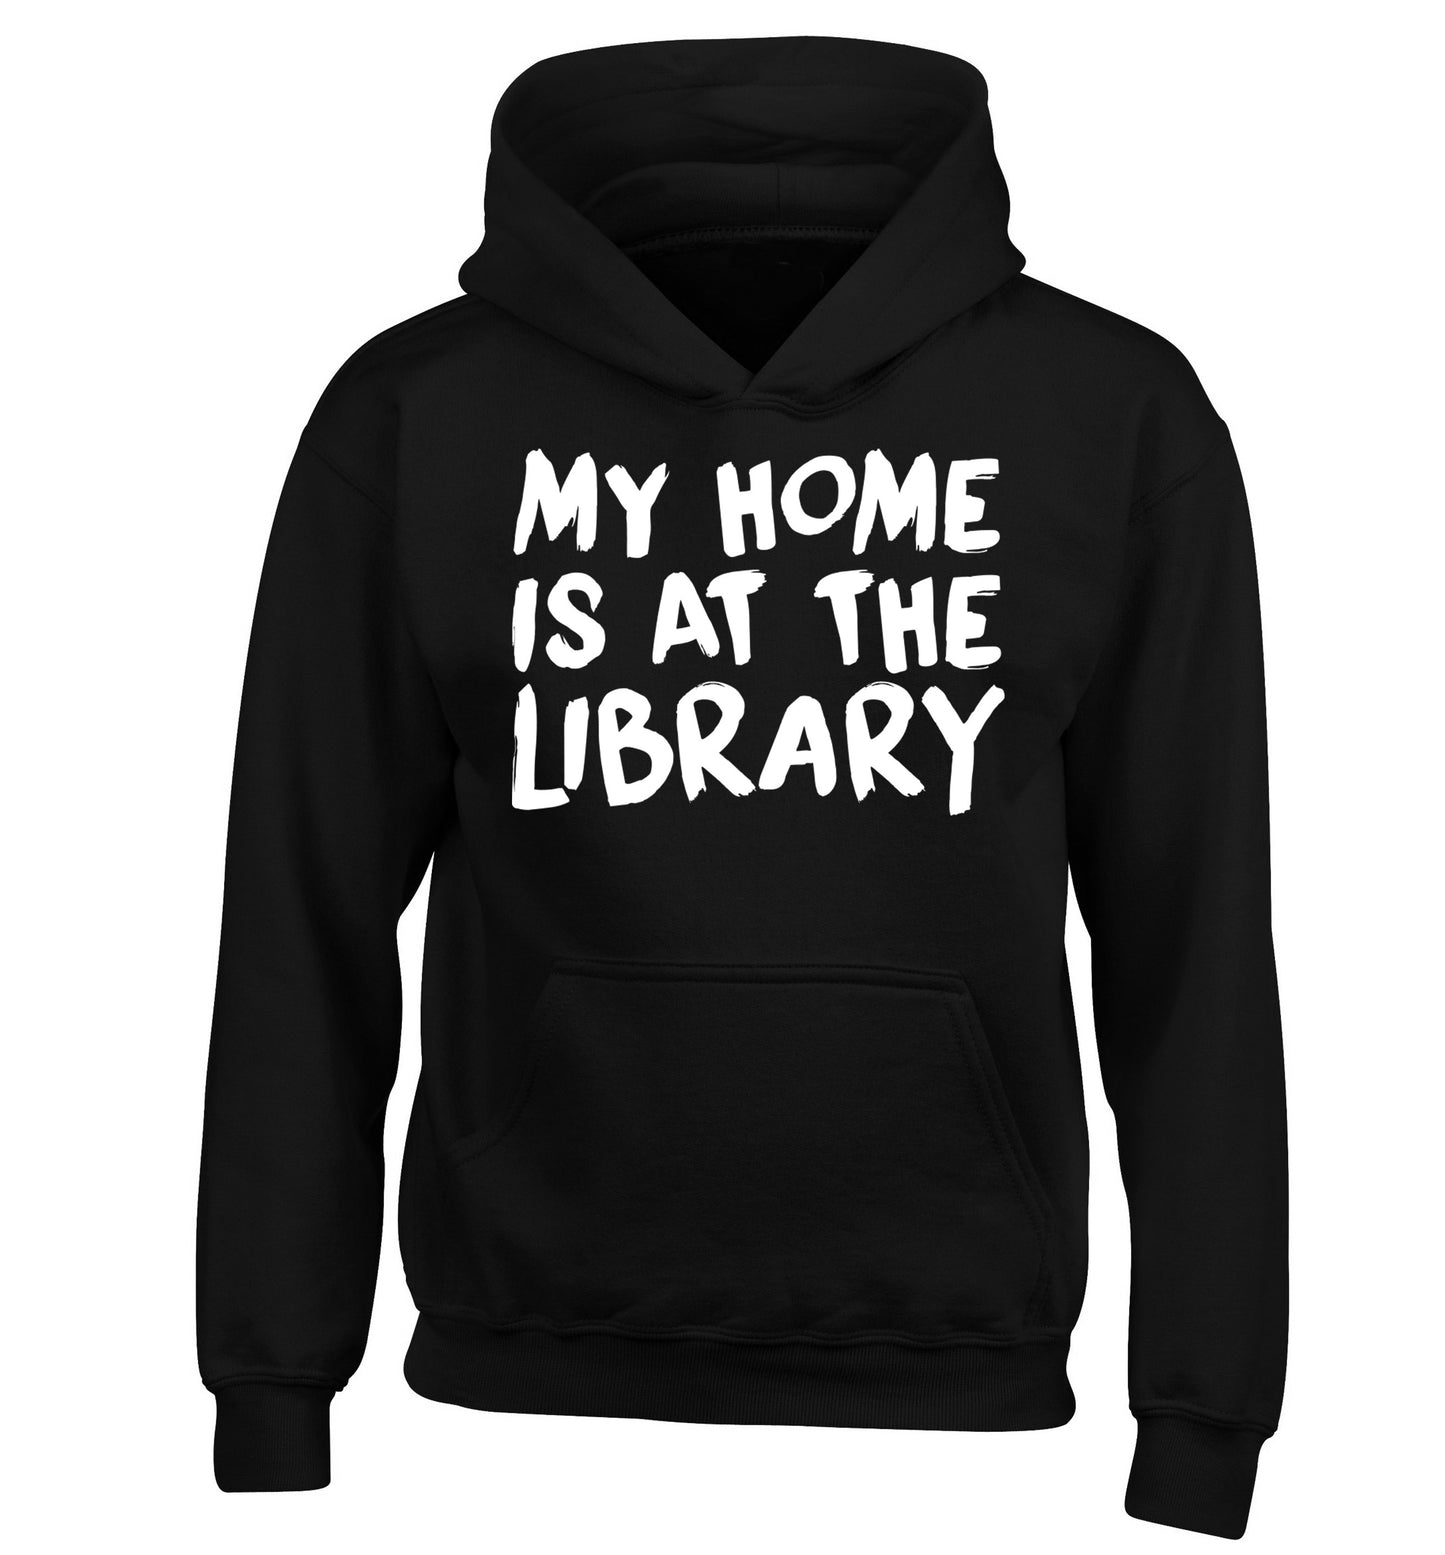 My home is at the library children's black hoodie 12-14 Years